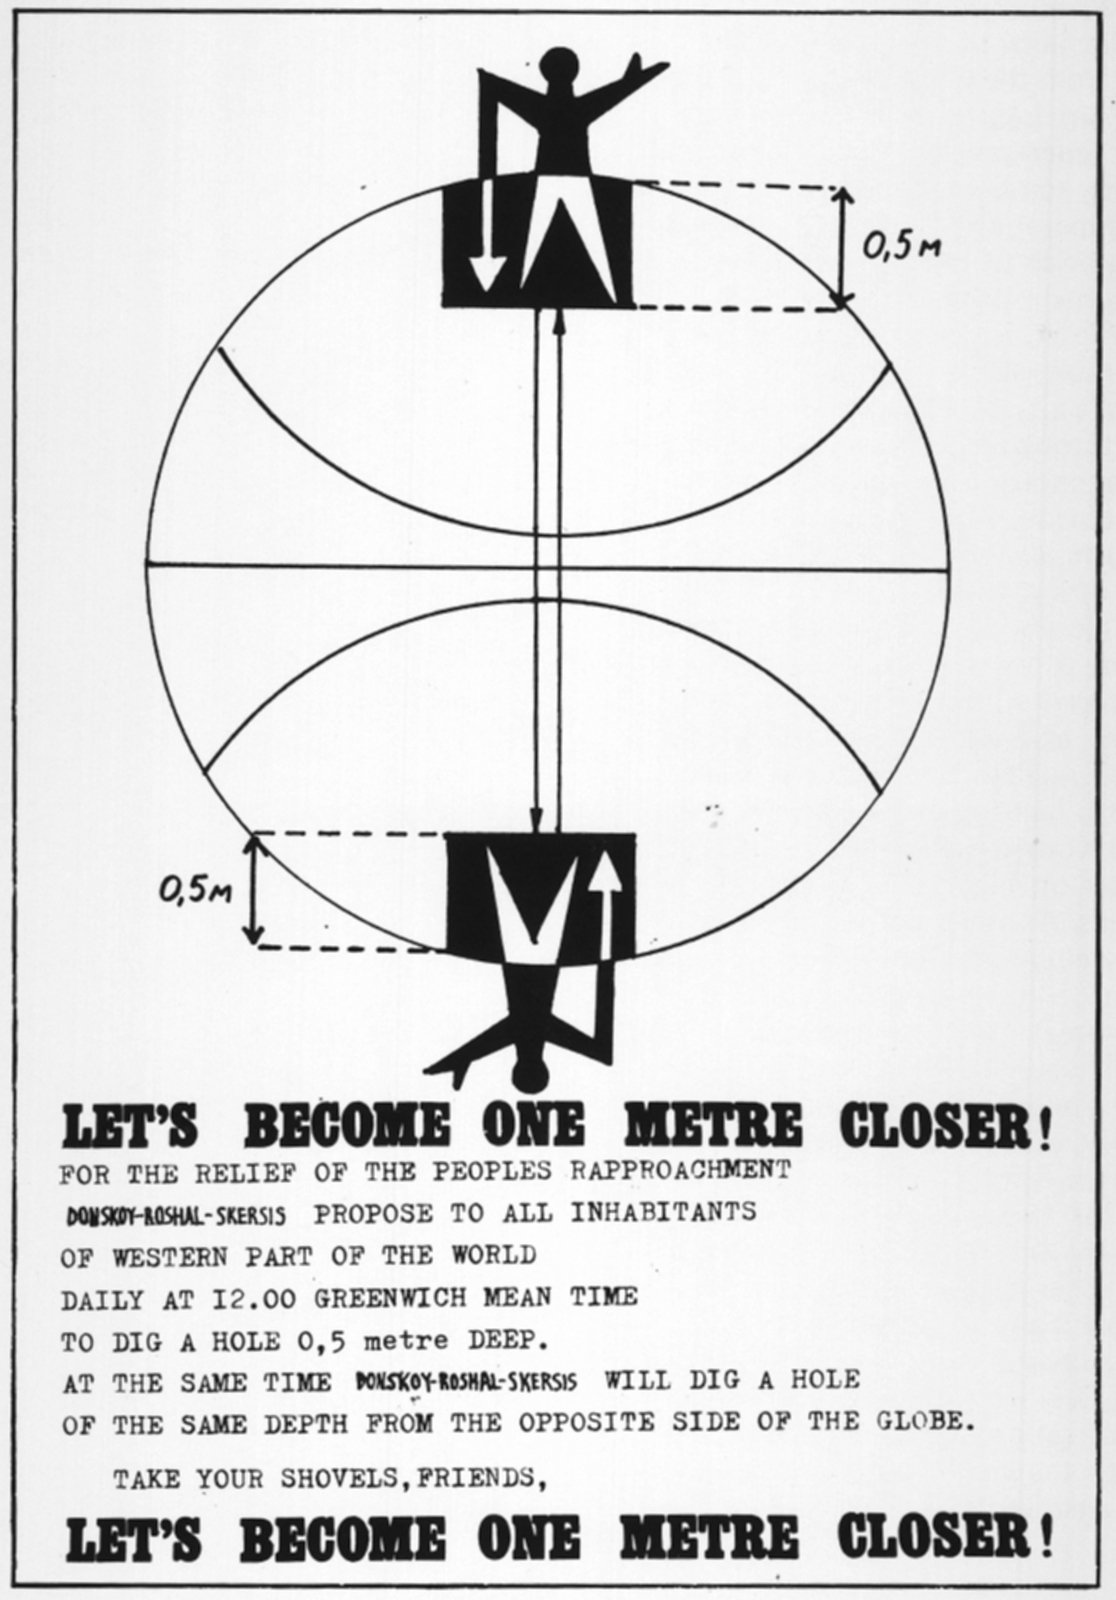 The Nest Group, Let's Become One Meter Closer, 1976